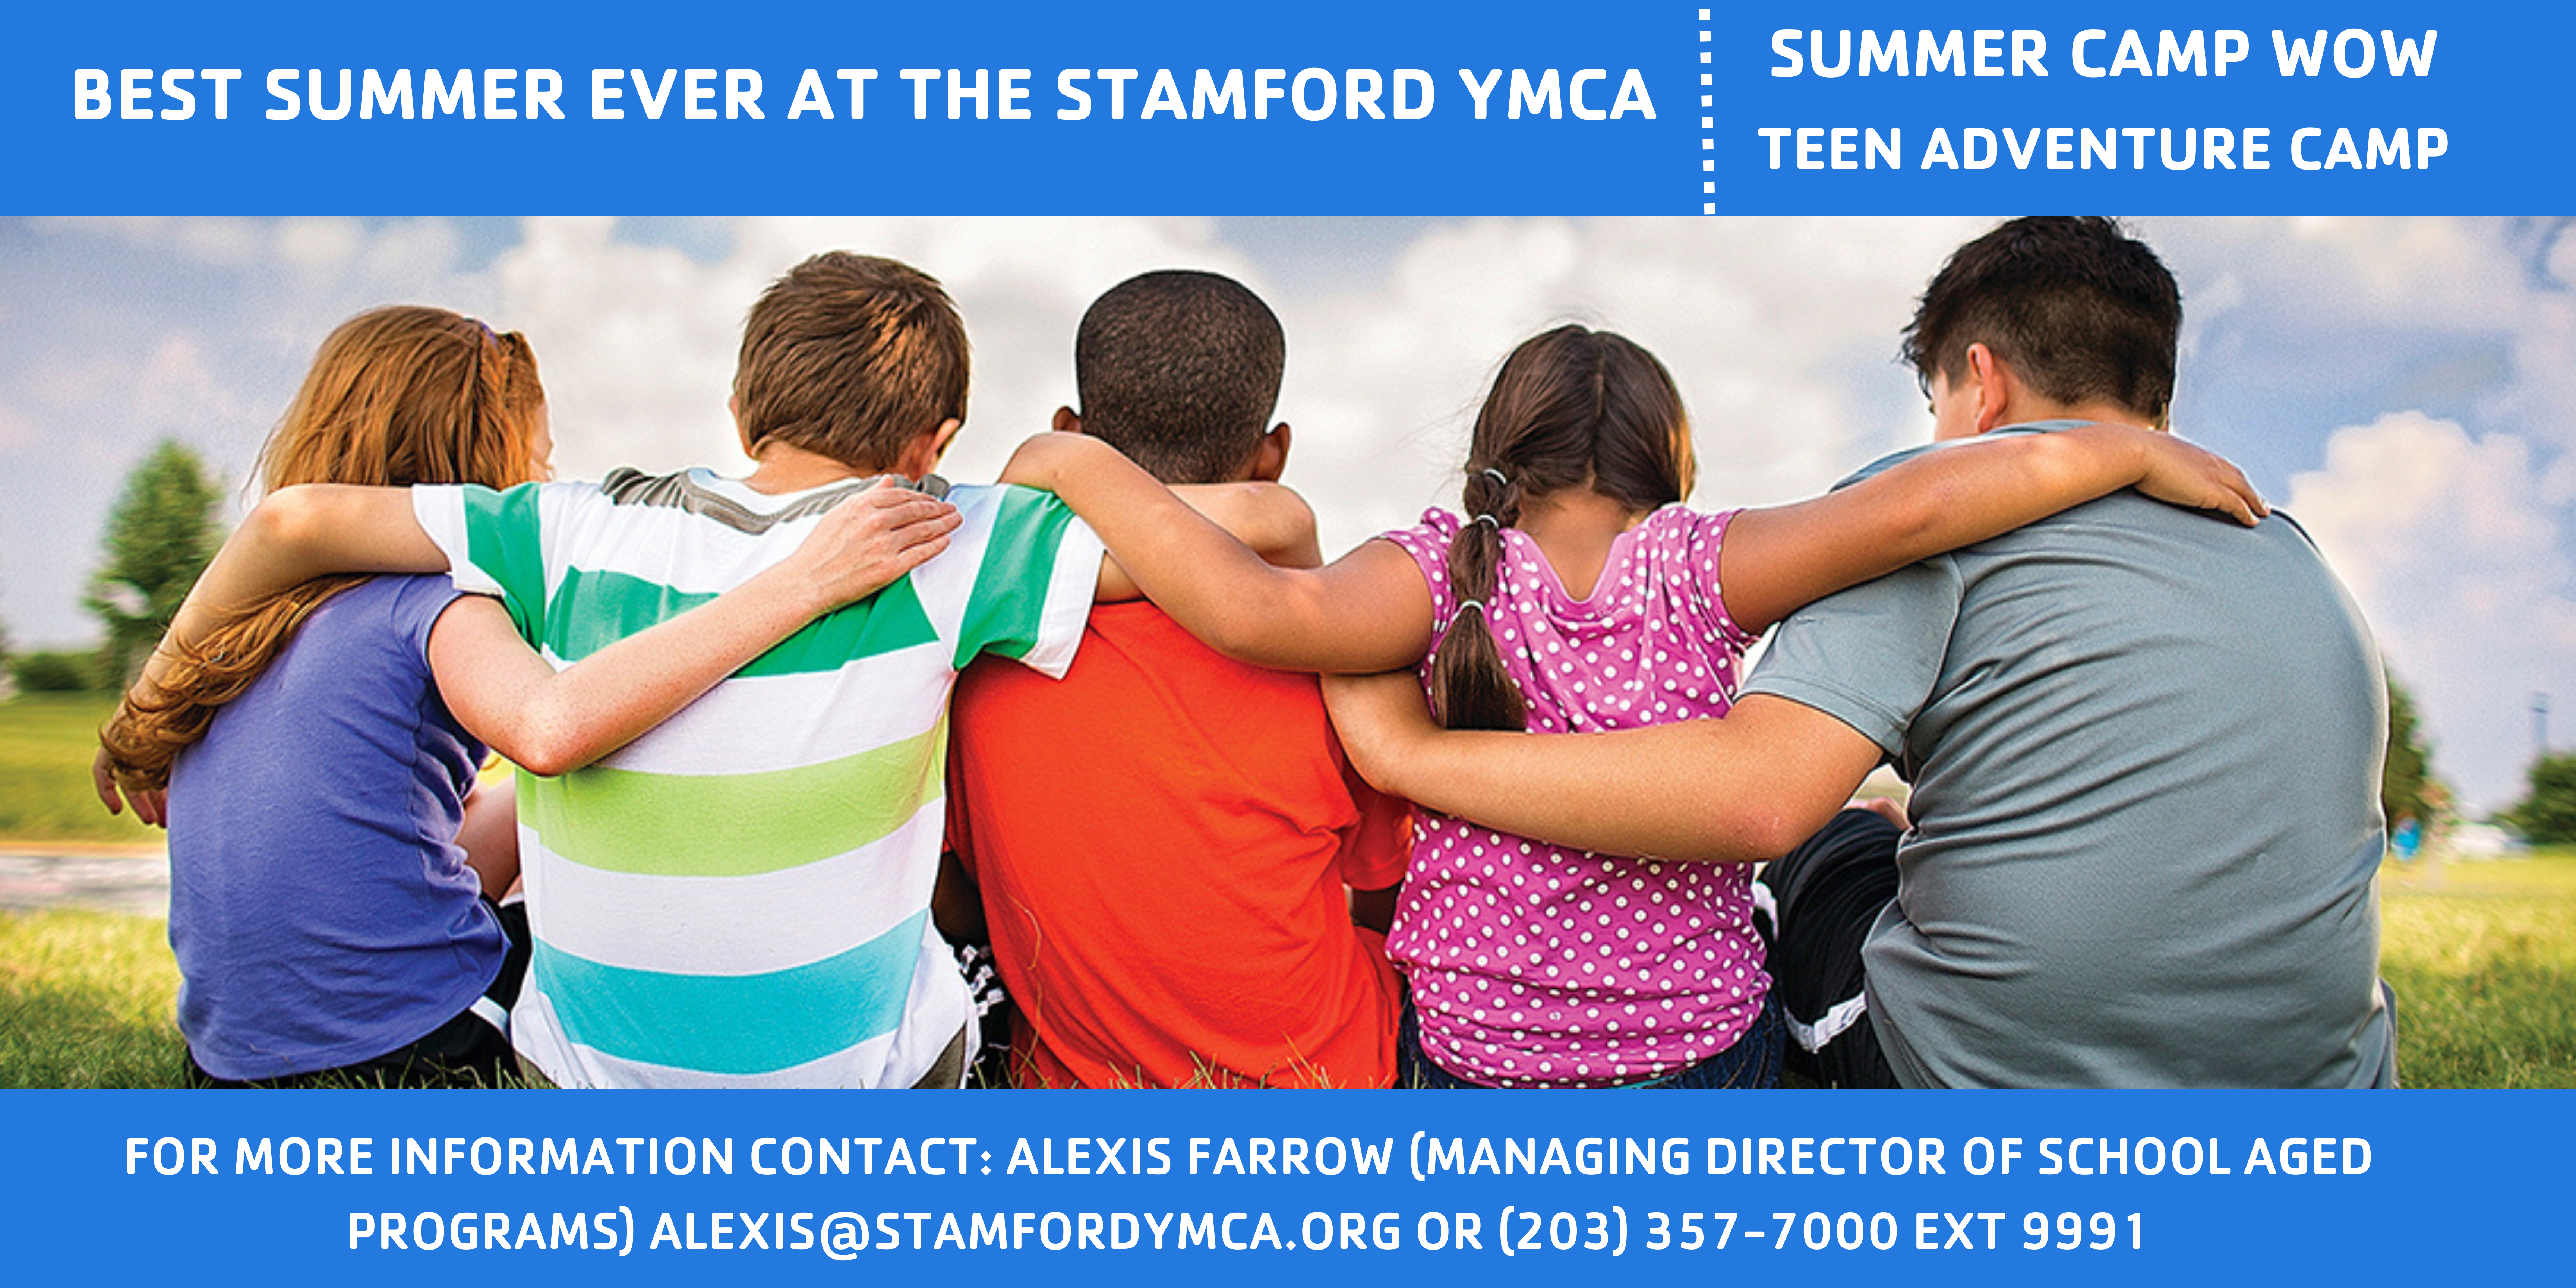 BEST SUMMER EVER AT THE STAMFORD YMCA